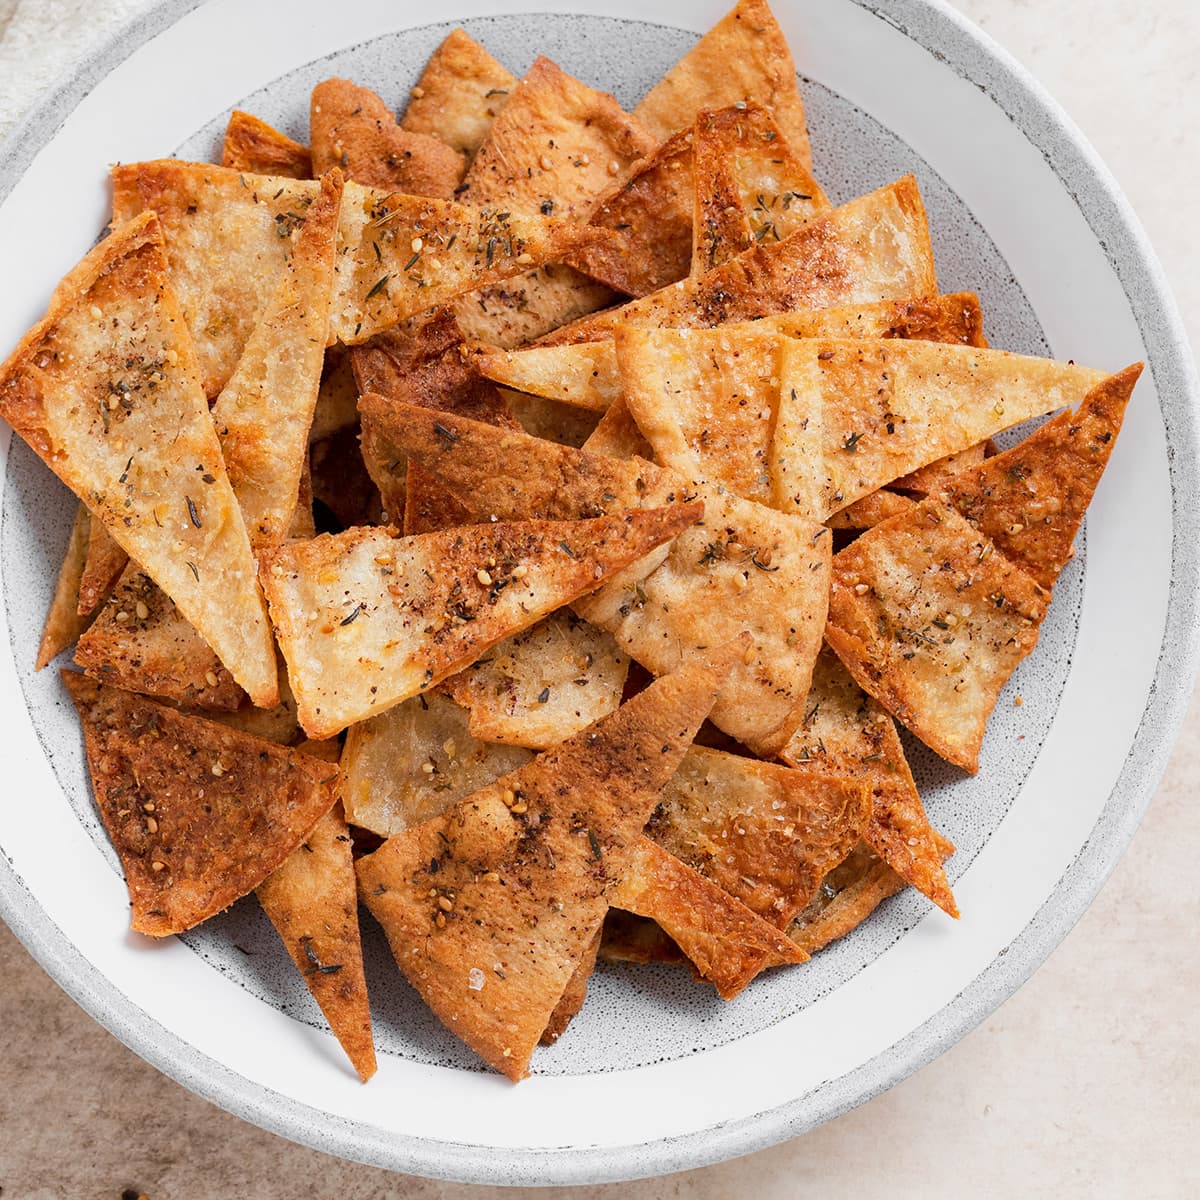 A close up photo of homemade pita chips in a grey bowl on a beige background.